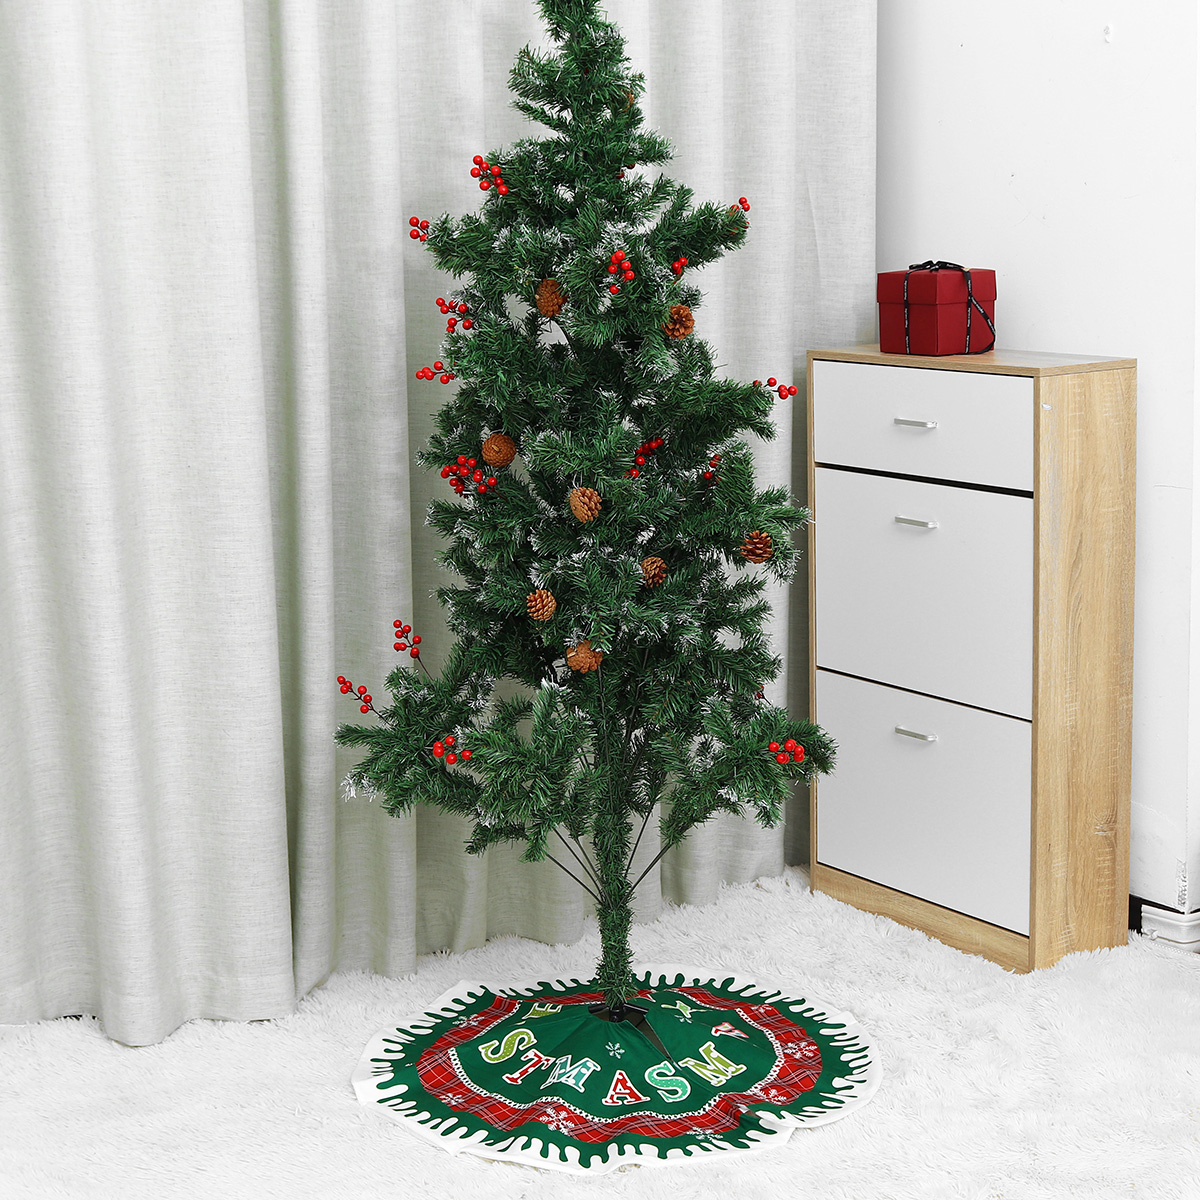 Christmas-Santa-Tree-Mat-Blanket-Carpet-Base-Ornament-Decoration-Apron-Wrap-for-Indoor-Outdoor-Party-1753294-9